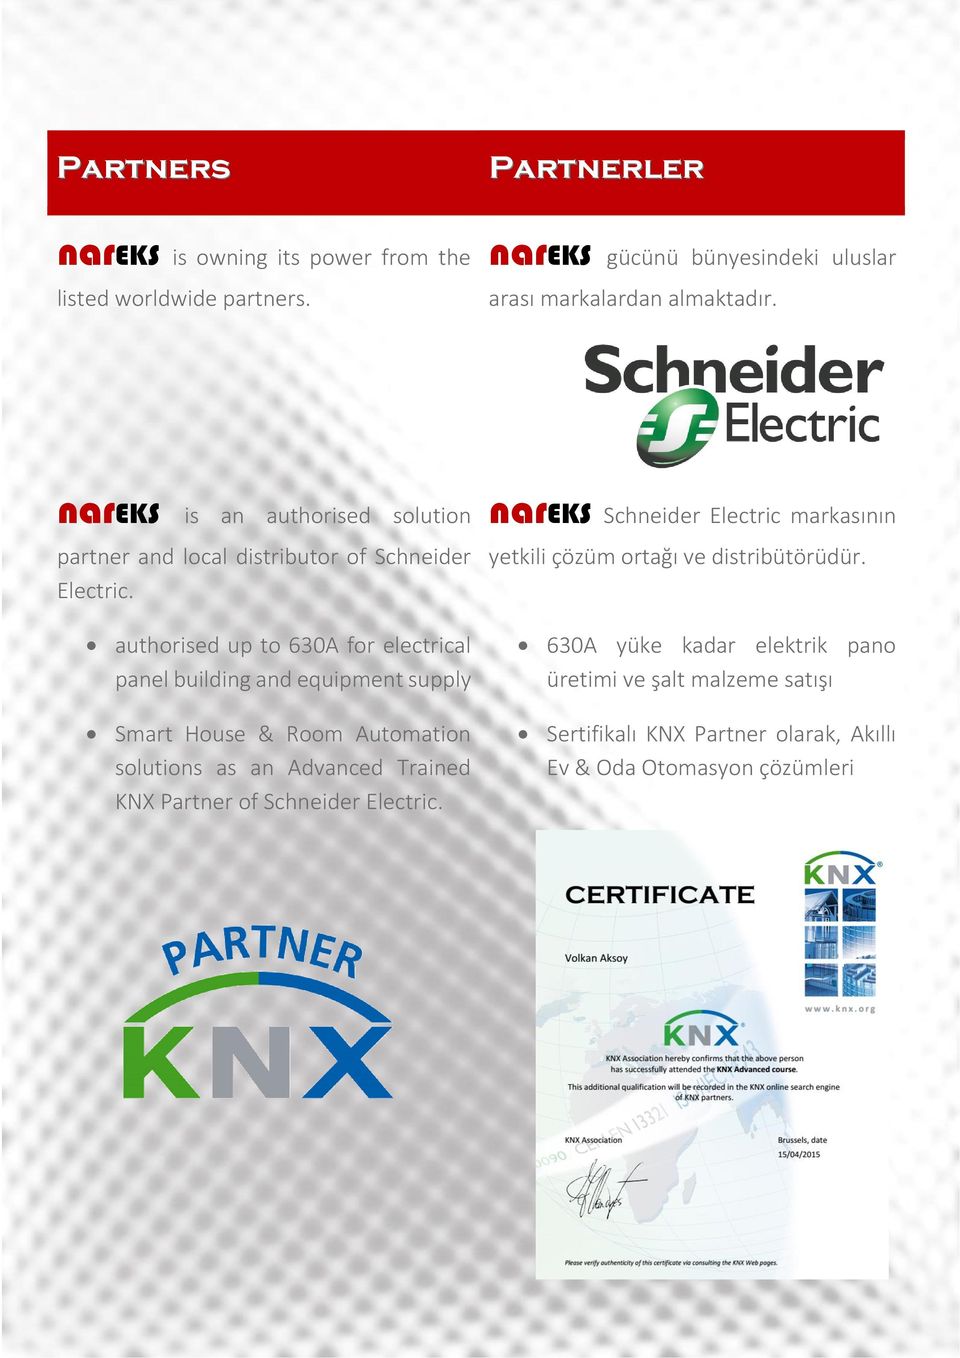 authorised up to 630A for electrical panel building and equipment supply Smart House & Room Automation solutions as an Advanced Trained KNX Partner of